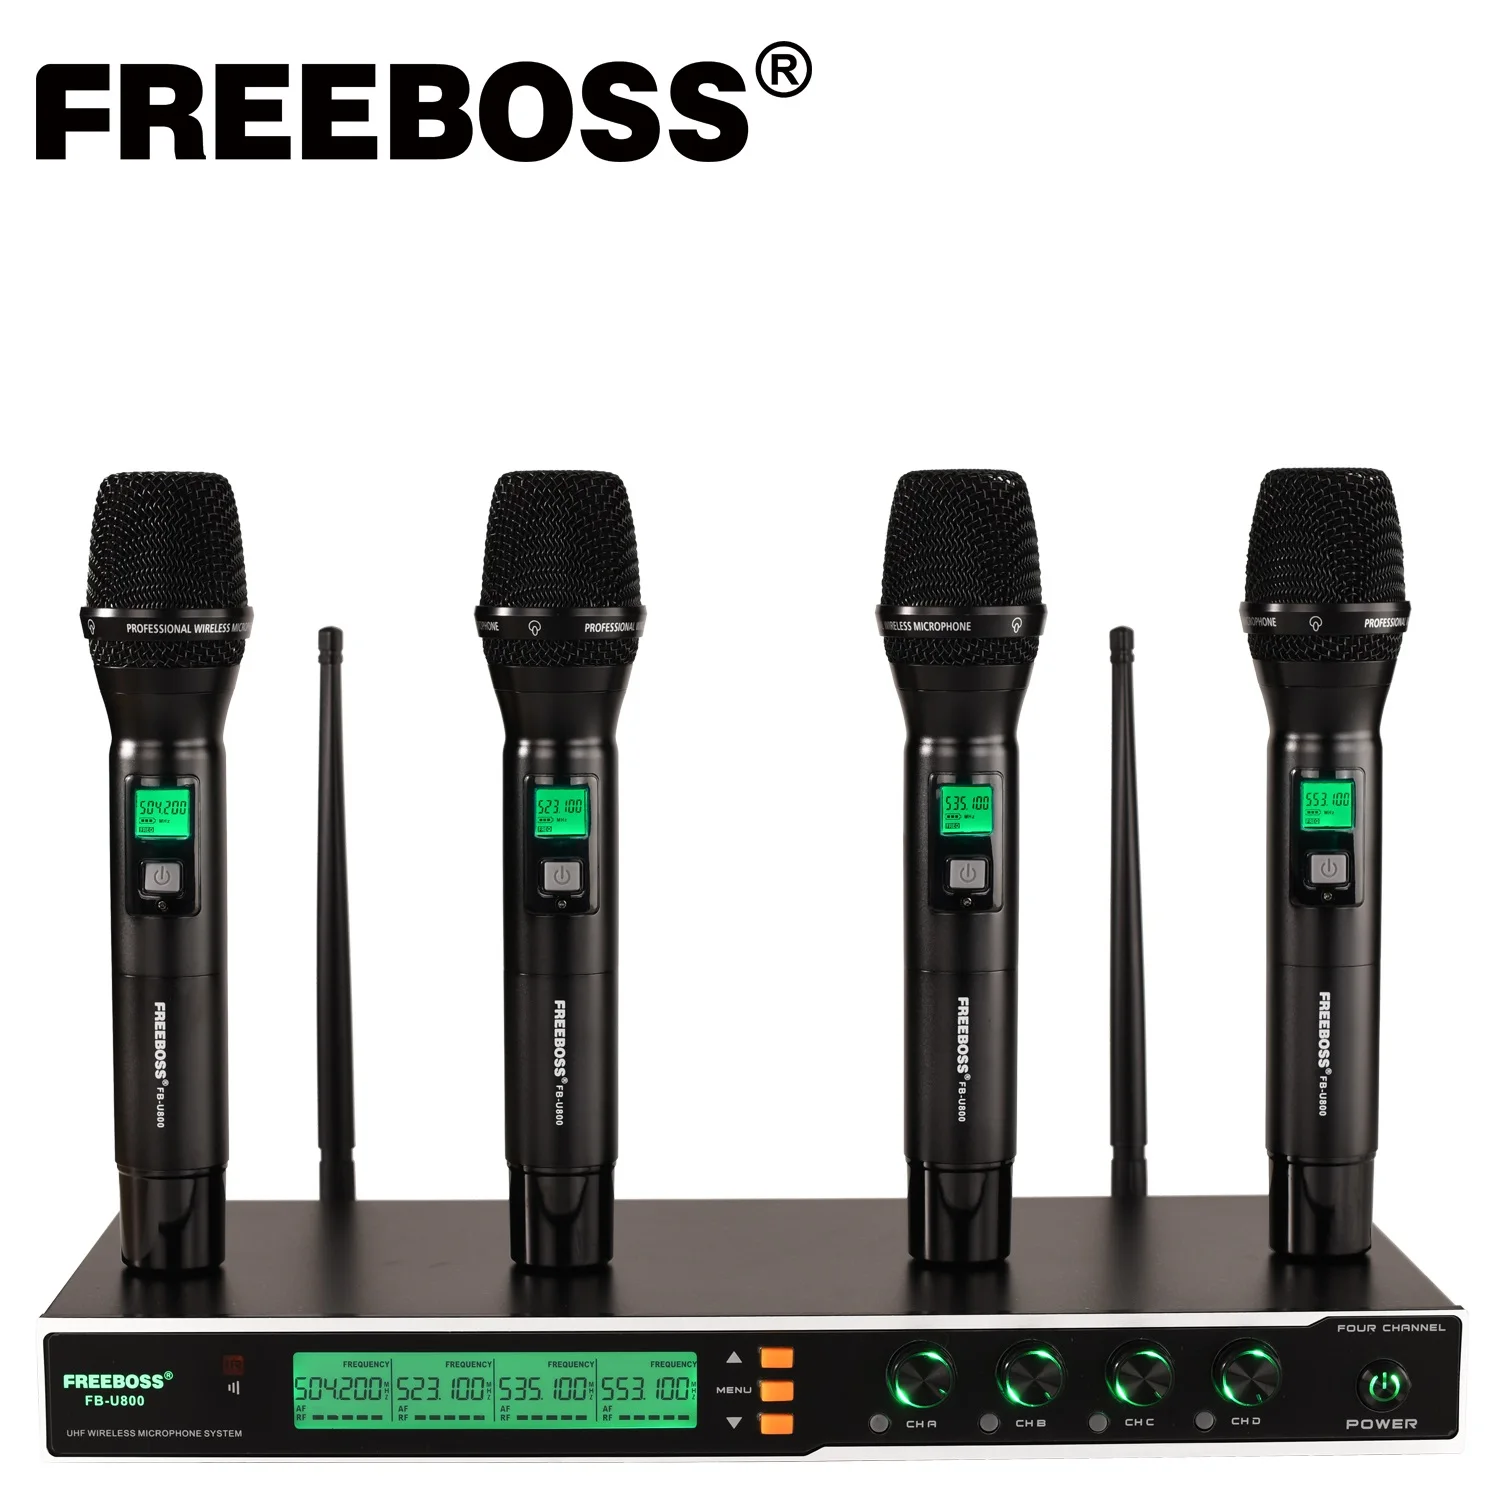 

Freeboss UHF 4*200 Adjustable Frequency Metal Handheld LCD Screen Smart Option Professional Microphone System for DJ FB-U800